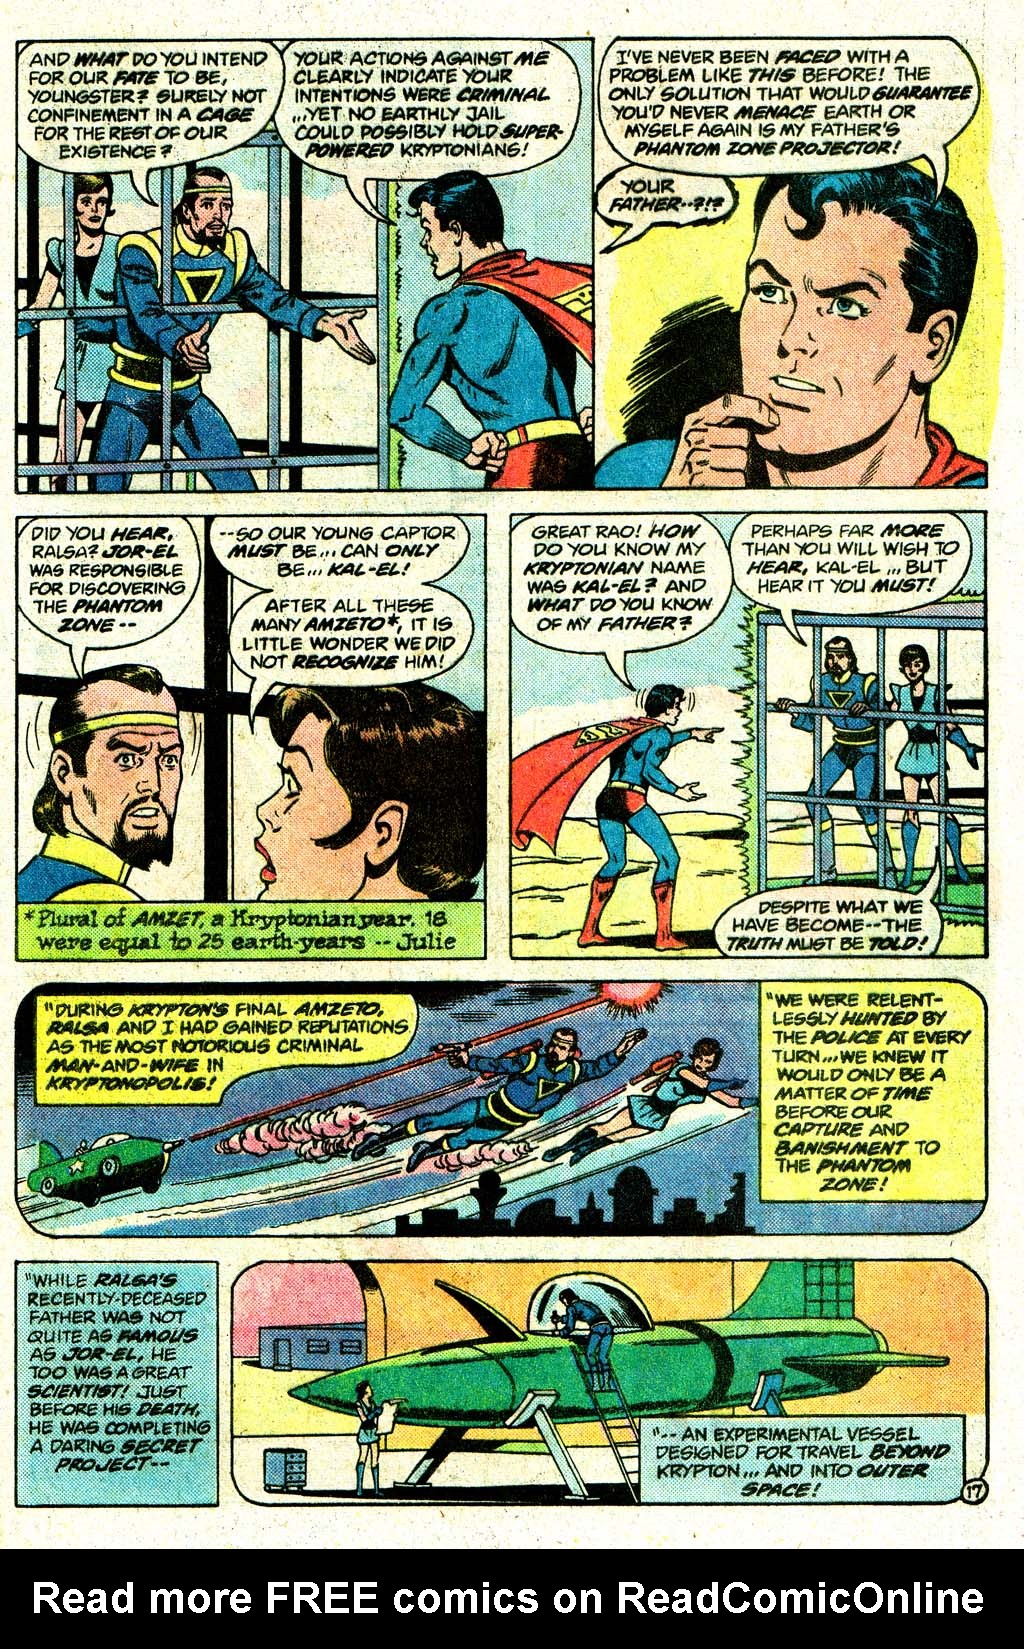 The New Adventures of Superboy 27 Page 20